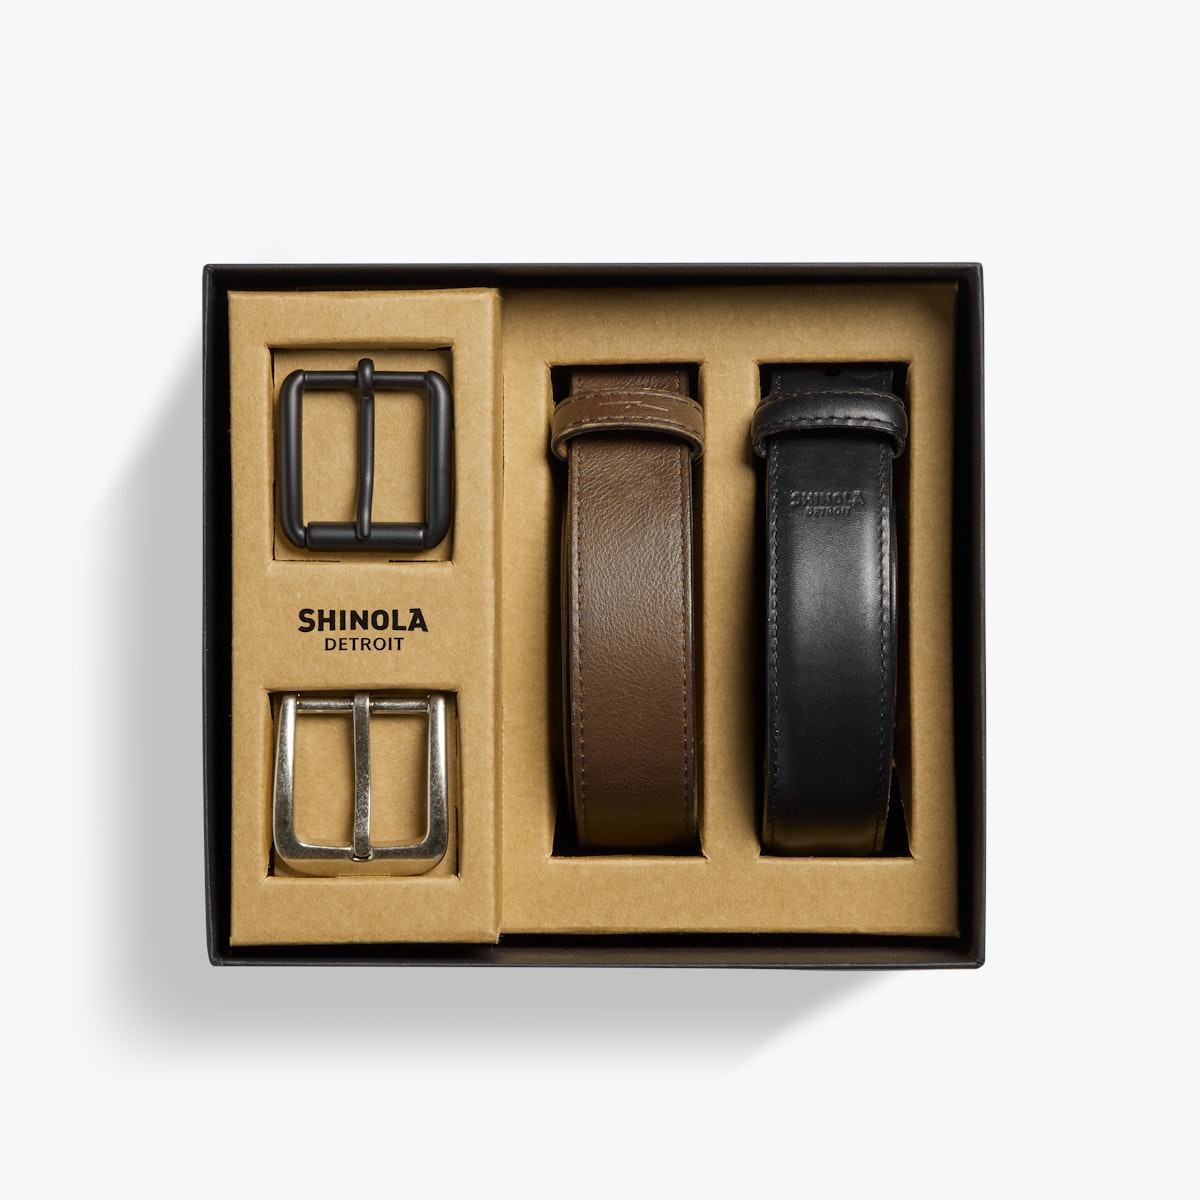 https://shinola-m2.imgix.net/images/Products/20229578-sdt-007062961/S0420229578_997_BeltGiftSet_HeritageNaturalLeather_BlackBrown_BR_V1_MAIN_01.png?h=1200&w=1200&bg=f7f7f7&q=80&auto=format,compress&fit=fillmax